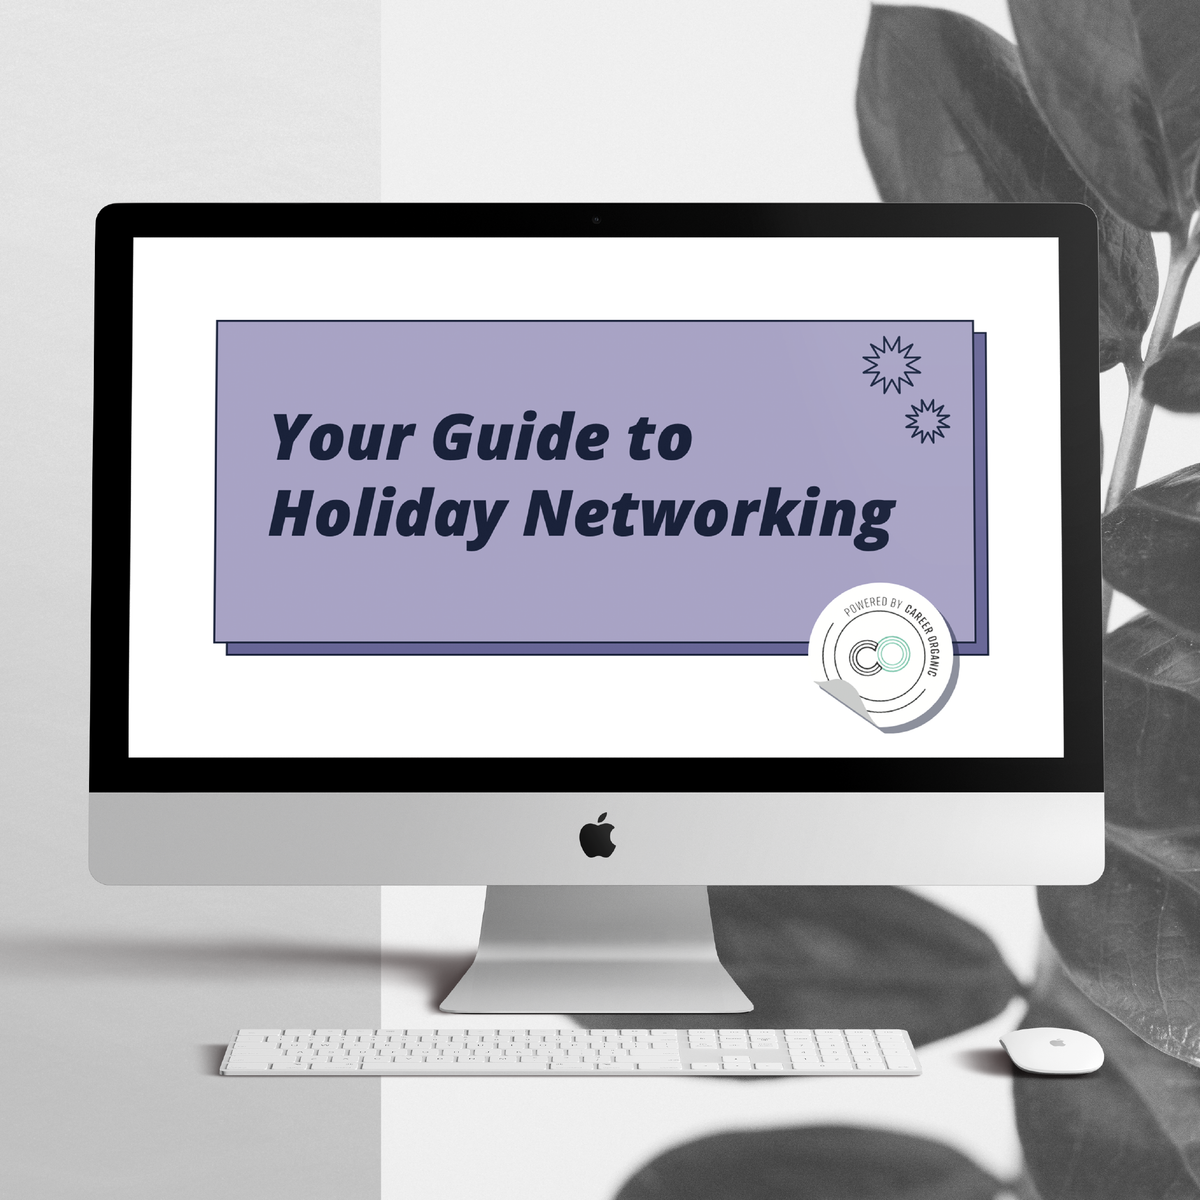 Your Guide to Holiday Networking